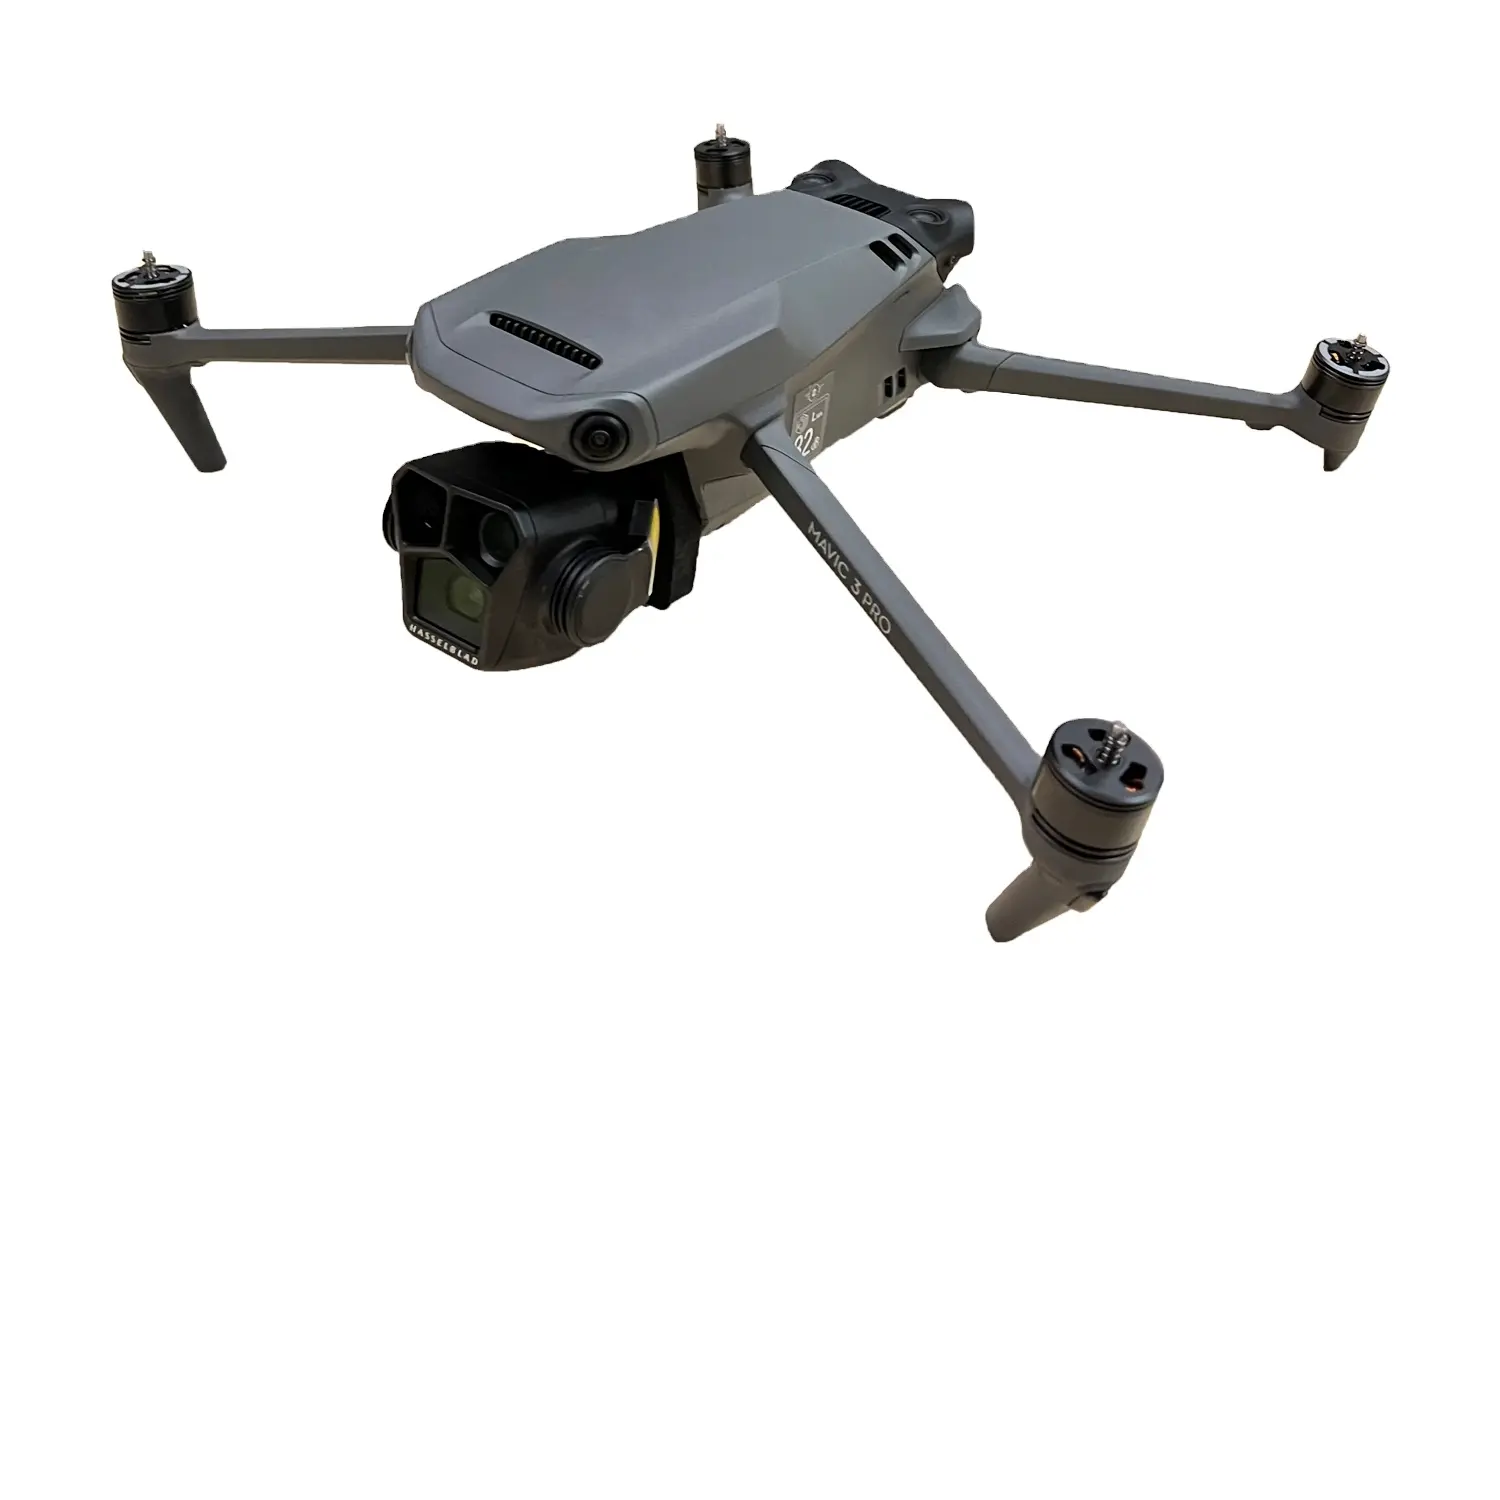 Mavic 3 Pro Dual Tele Cameras Remote Control And App Control Foldable And Lighted Drone For Beginner Enthusiasts